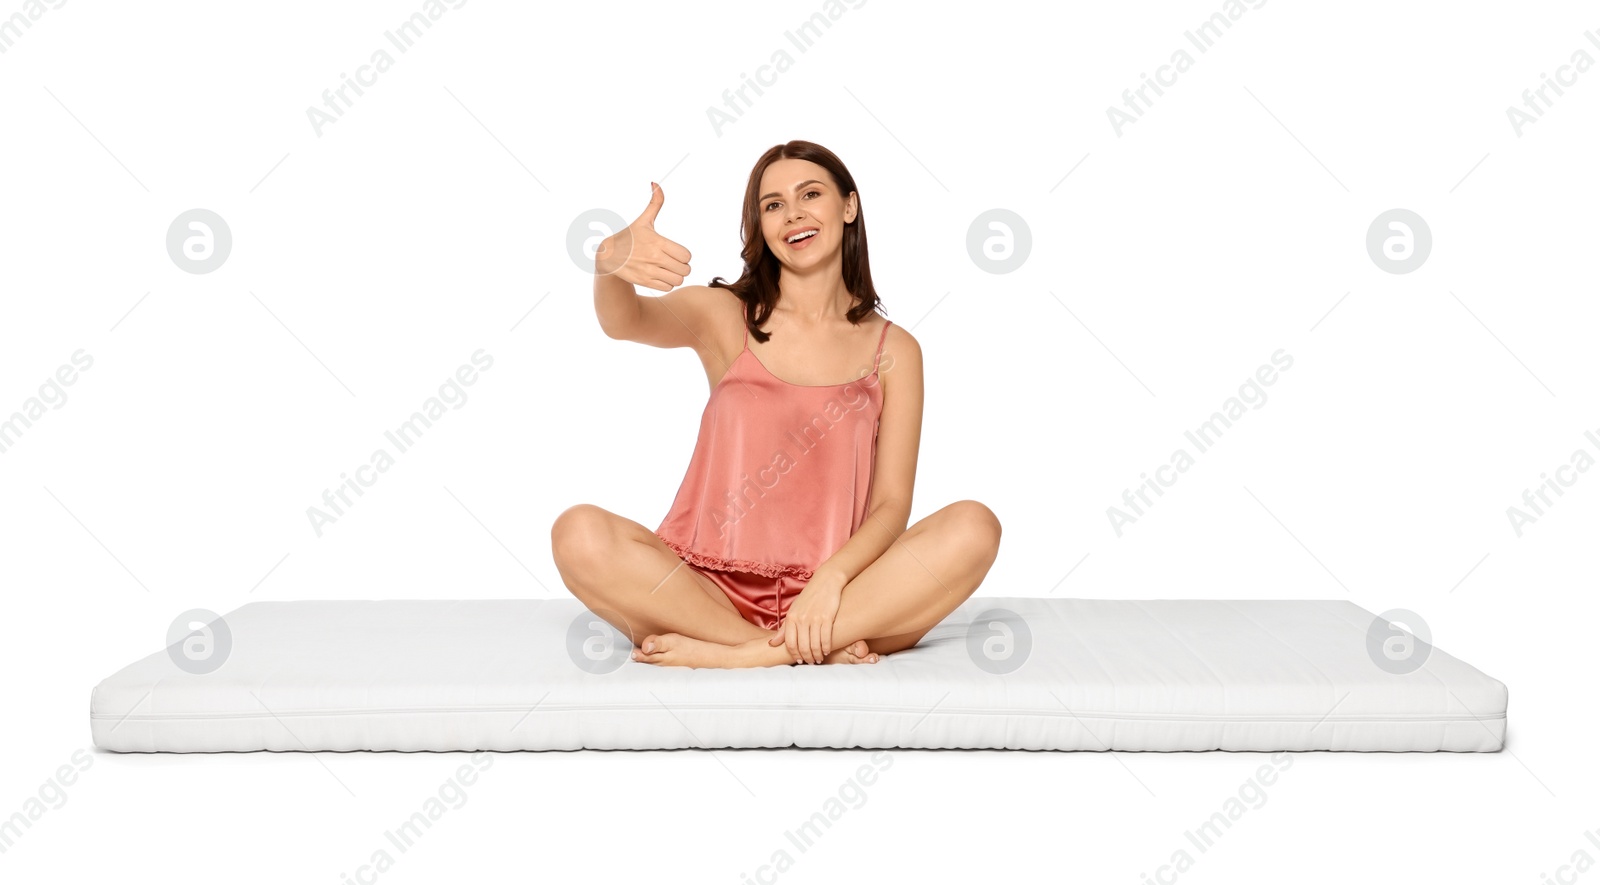 Photo of Young woman sitting on soft mattress and showing thumbs up against white background